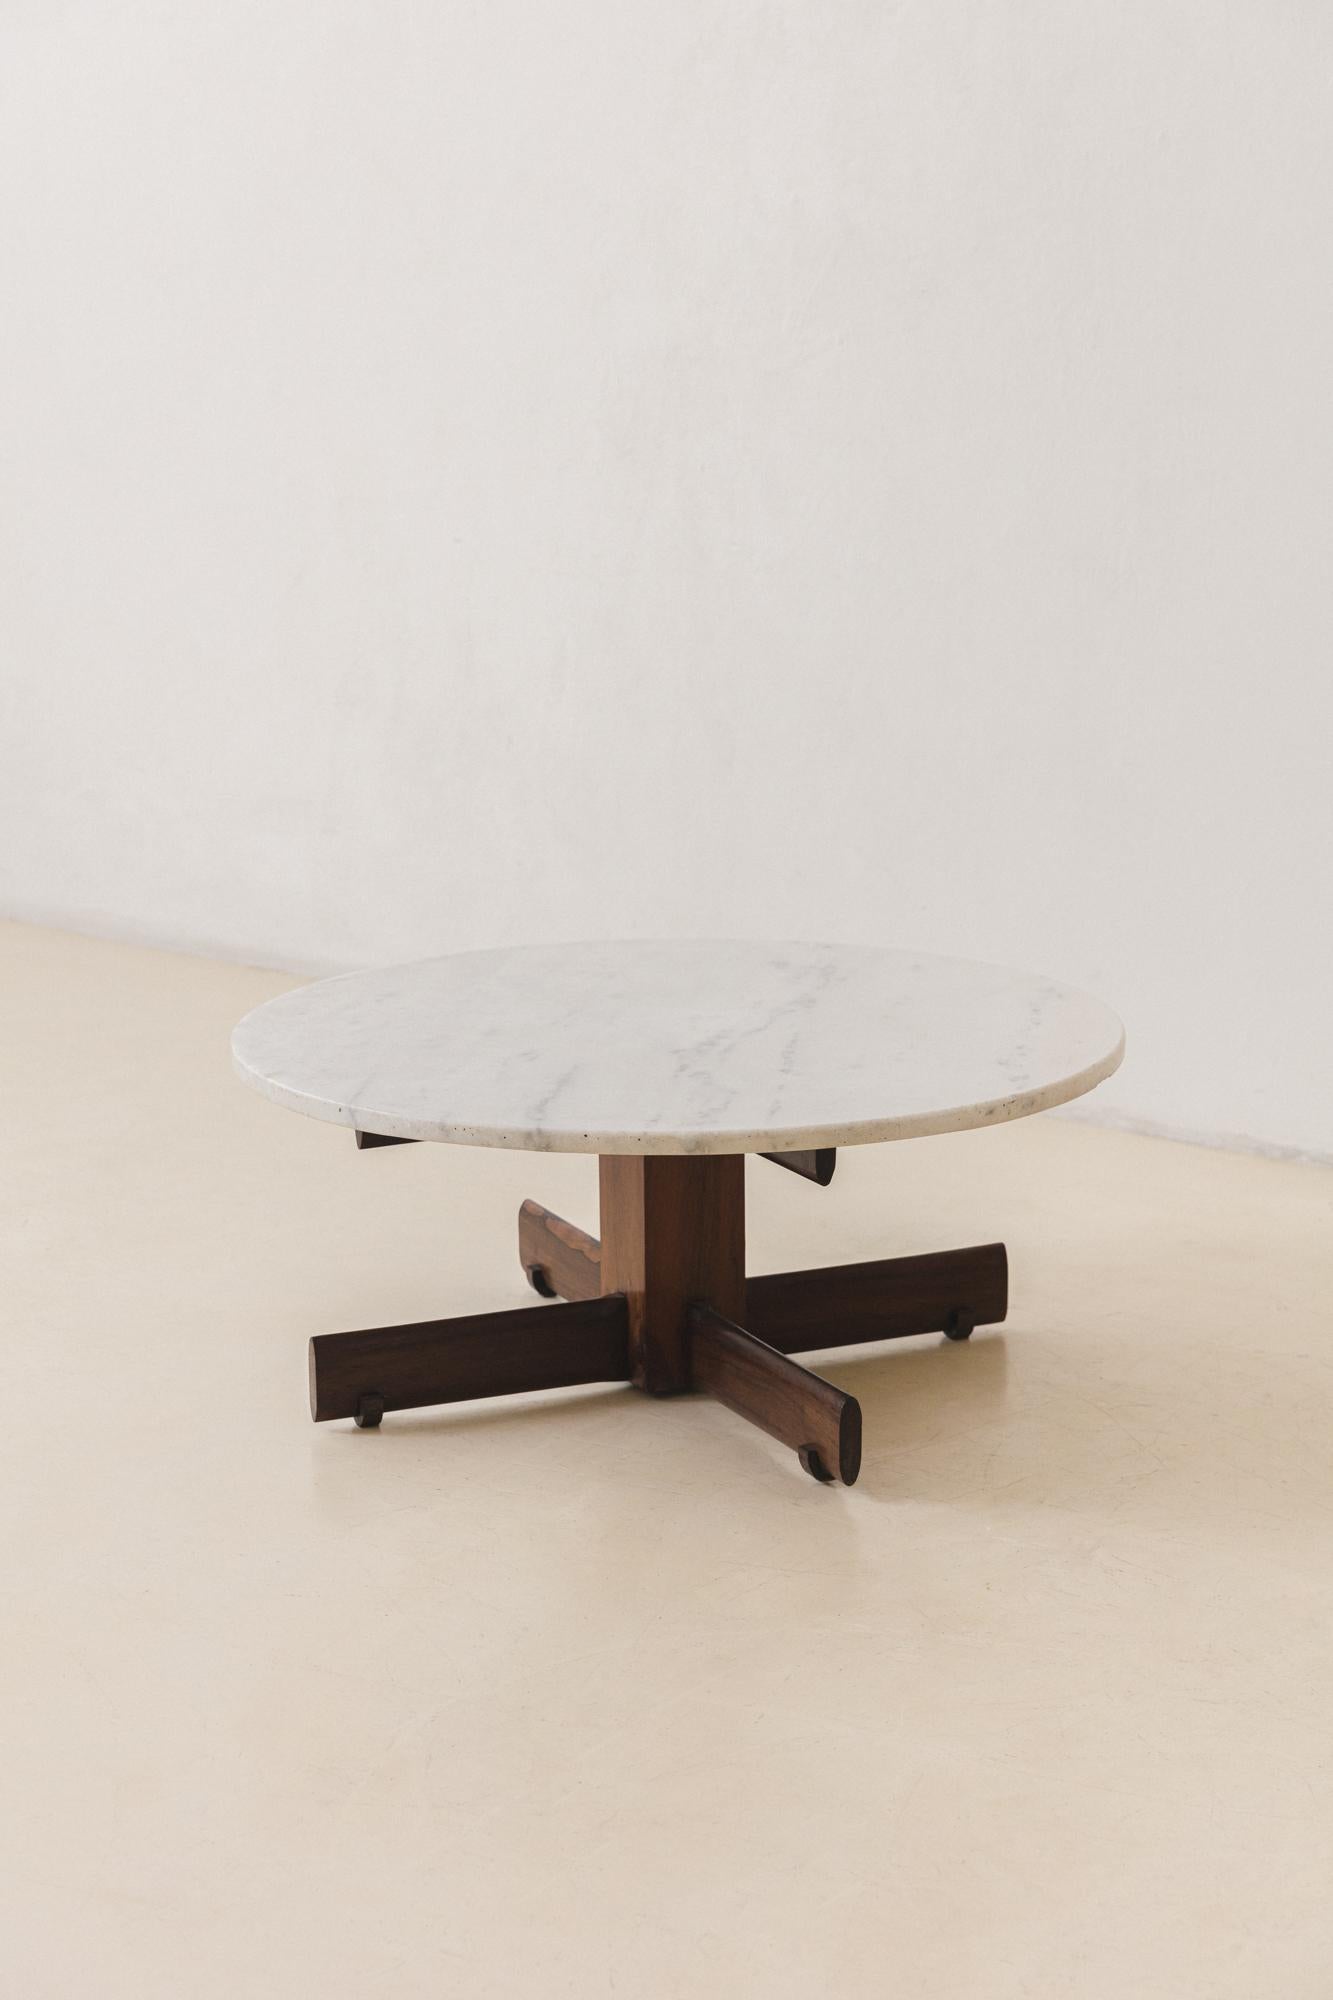 Mid-20th Century Rosewood and Marble Coffee Table, Unknown Designer, Mid-Century Brazilian, 1960s For Sale